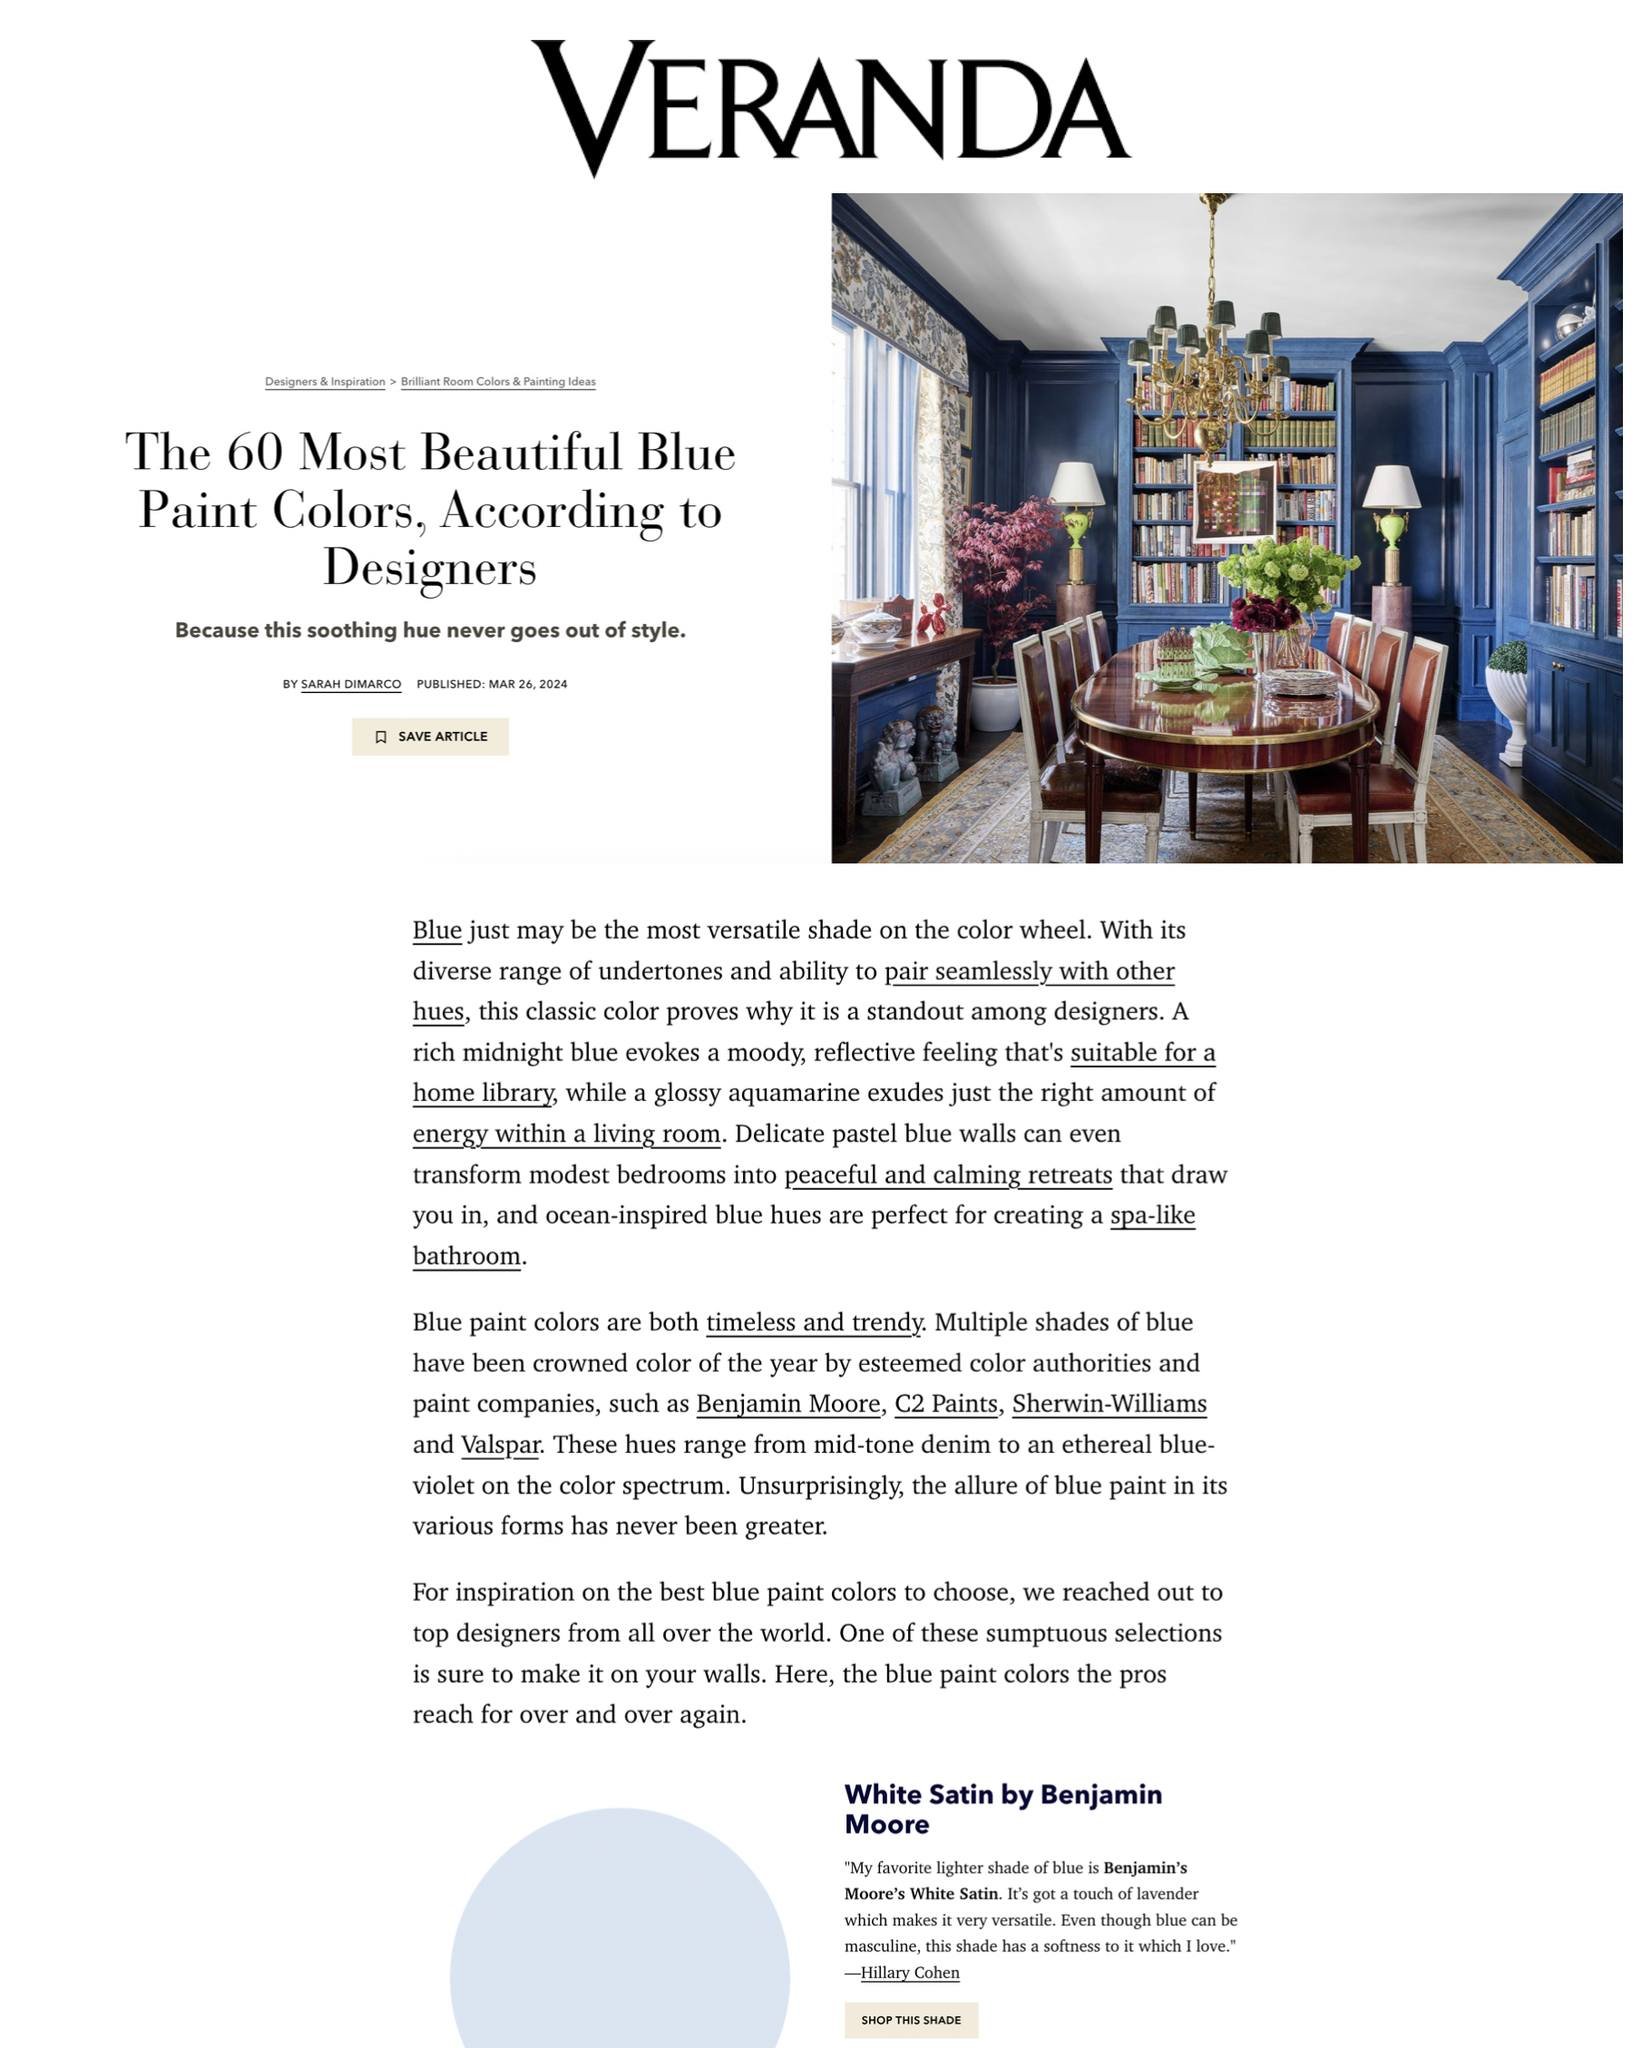 Thanks for letting us sing the blues @verandamag 

#interiordesign #njinteriordesigner
#interiordesigner #njhome
#newjerseyinteriordesign
#nycinteriordesign #nyc
#newyorkdesigners #nycliving #housebeautiful #interiordesignersofinsta 
#florhamparknj #